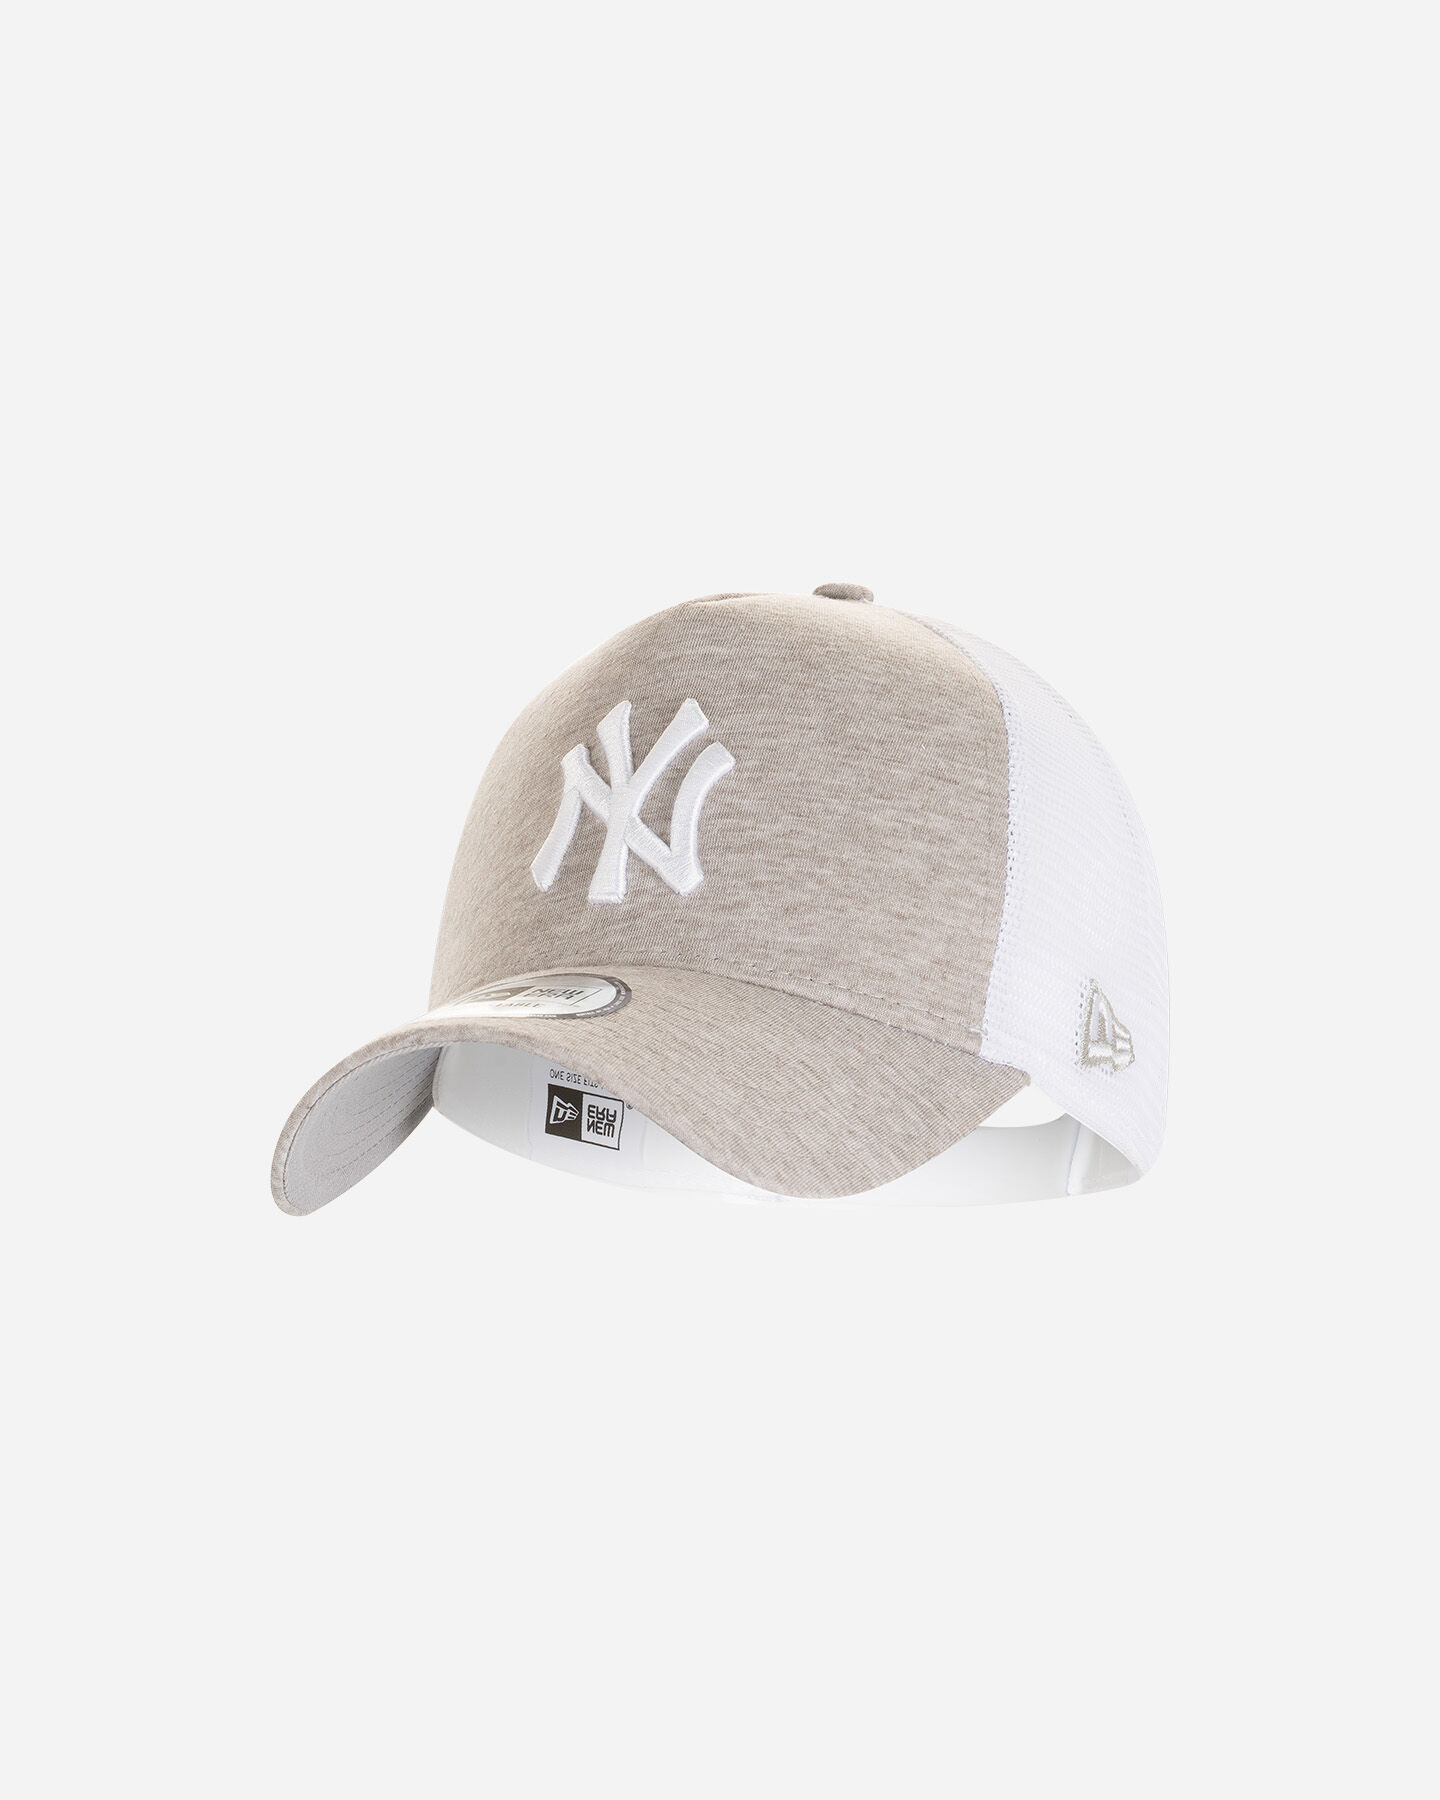  Cappellino NEW ERA 9FORTY AF TRUCKER NEW YORK YANKEES  S5200502|020|OSFM scatto 0